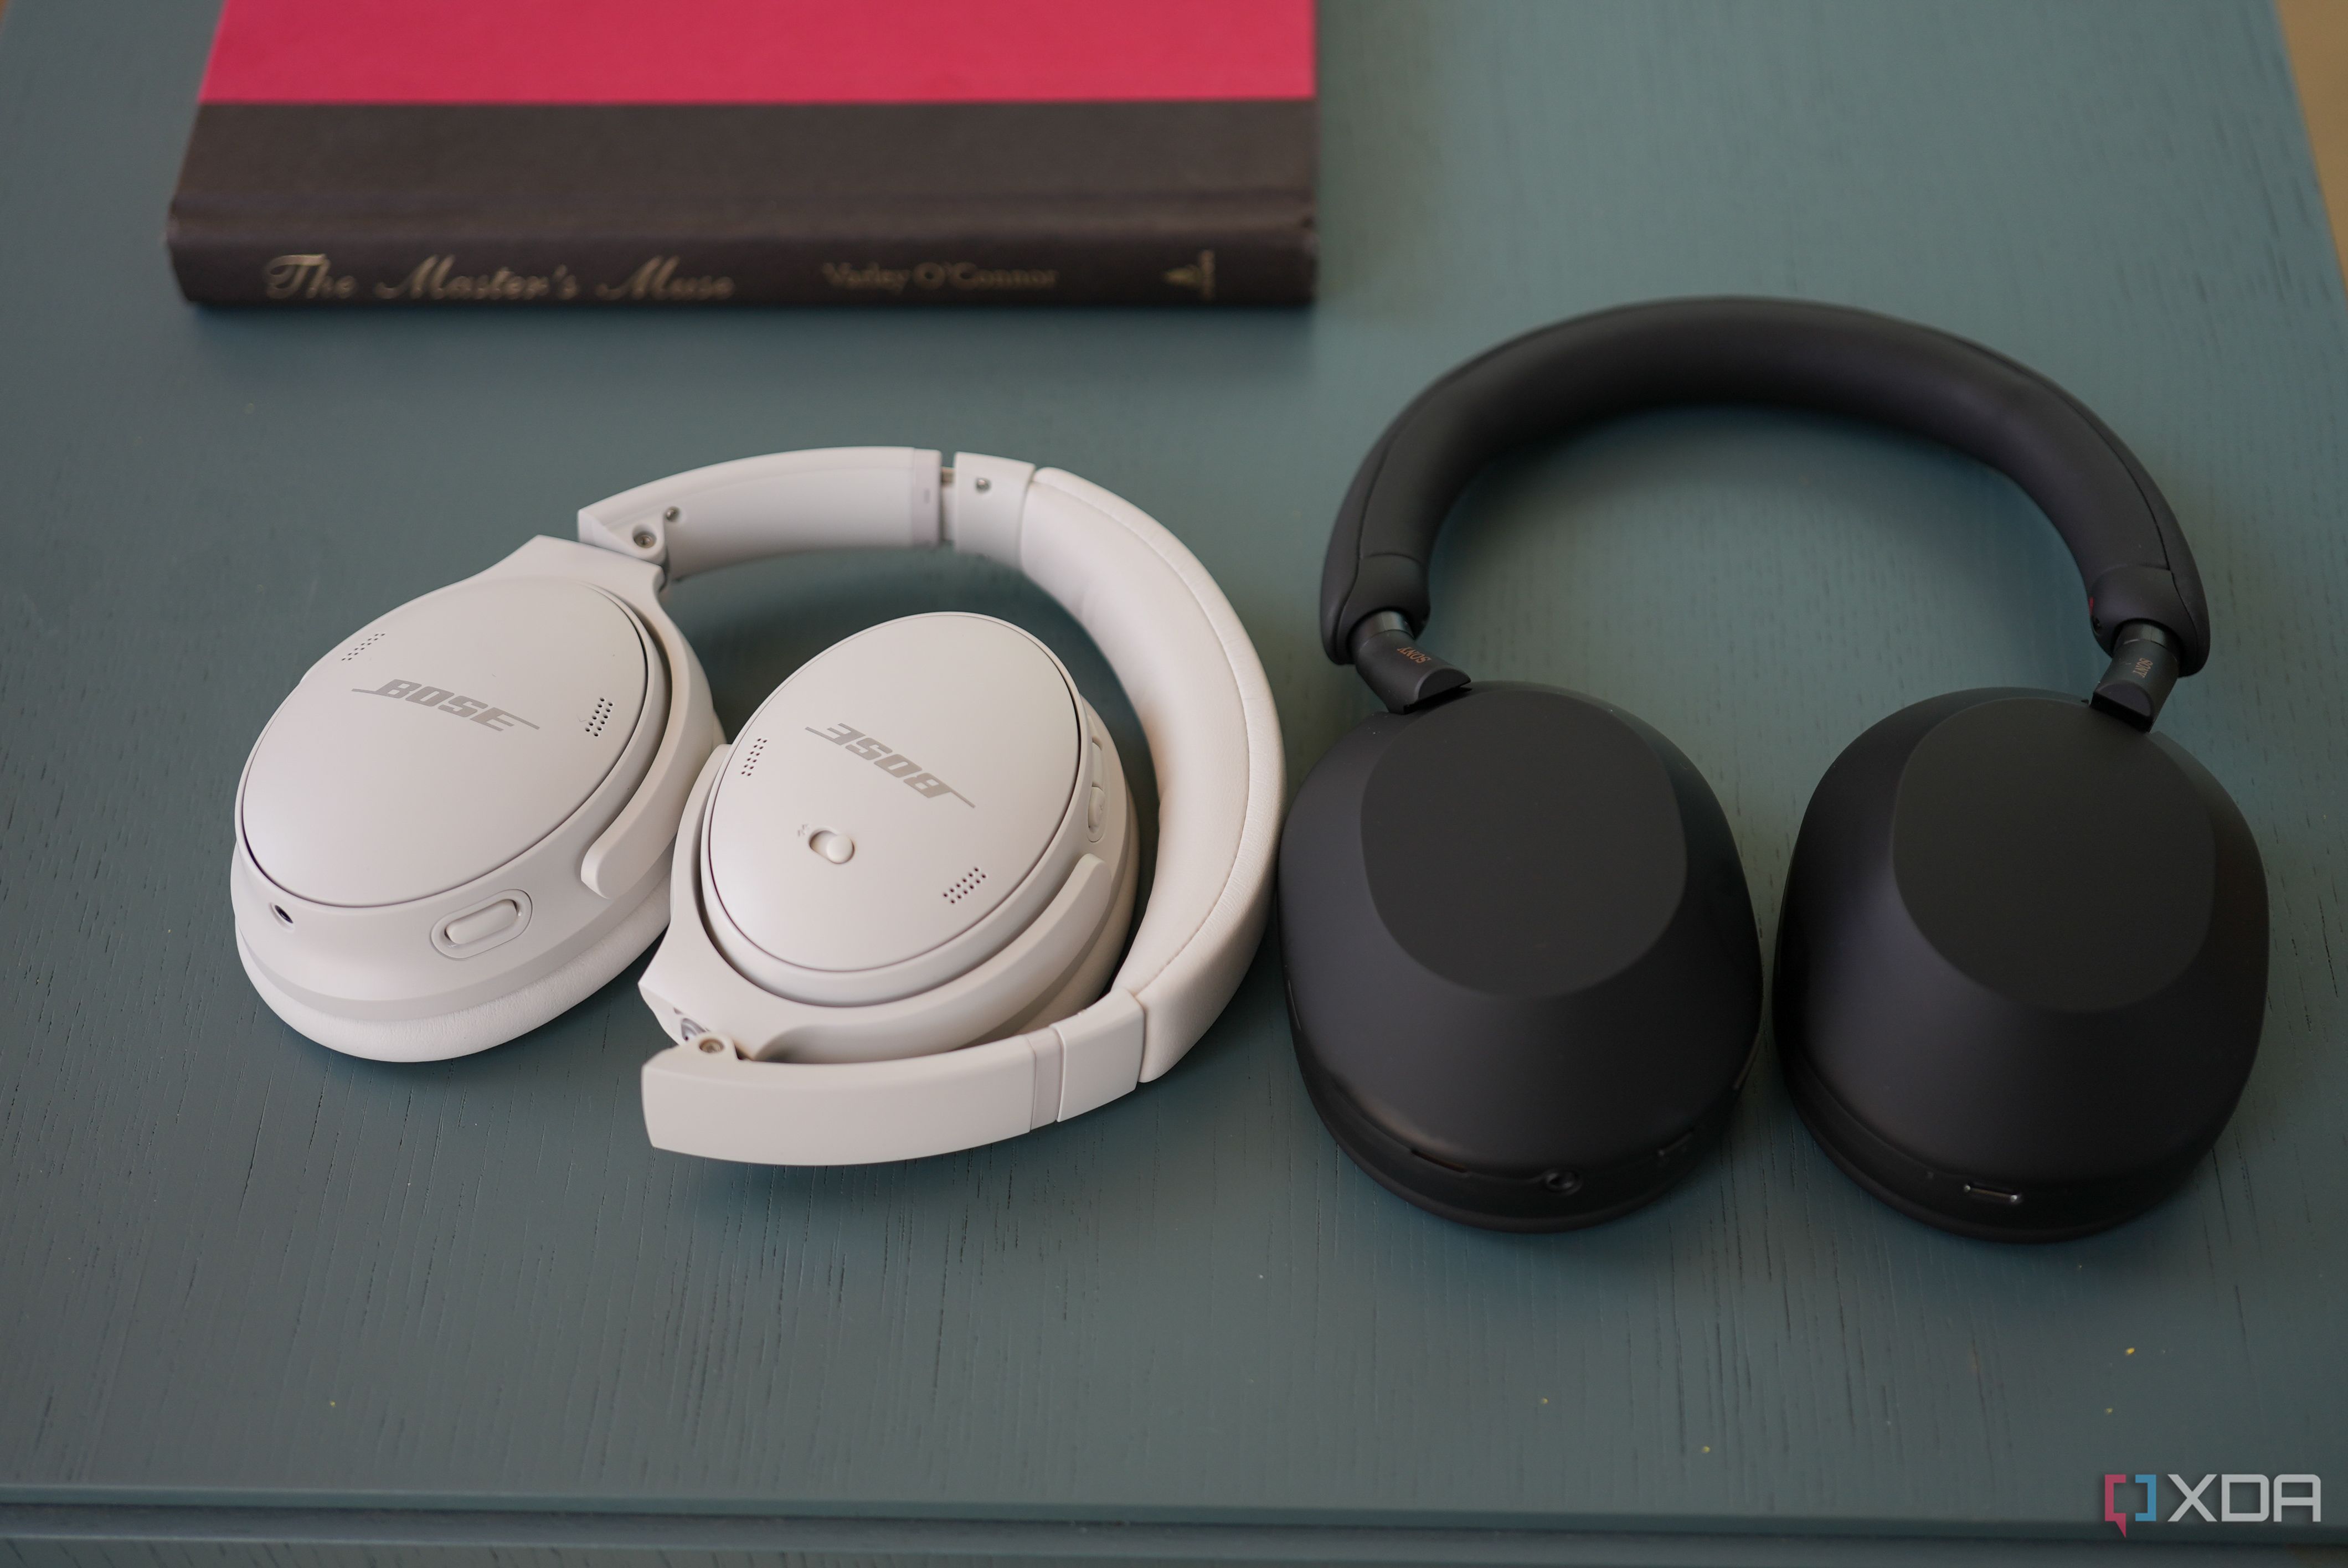 Bose aims to retake the ANC crown with the QuietComfort 45